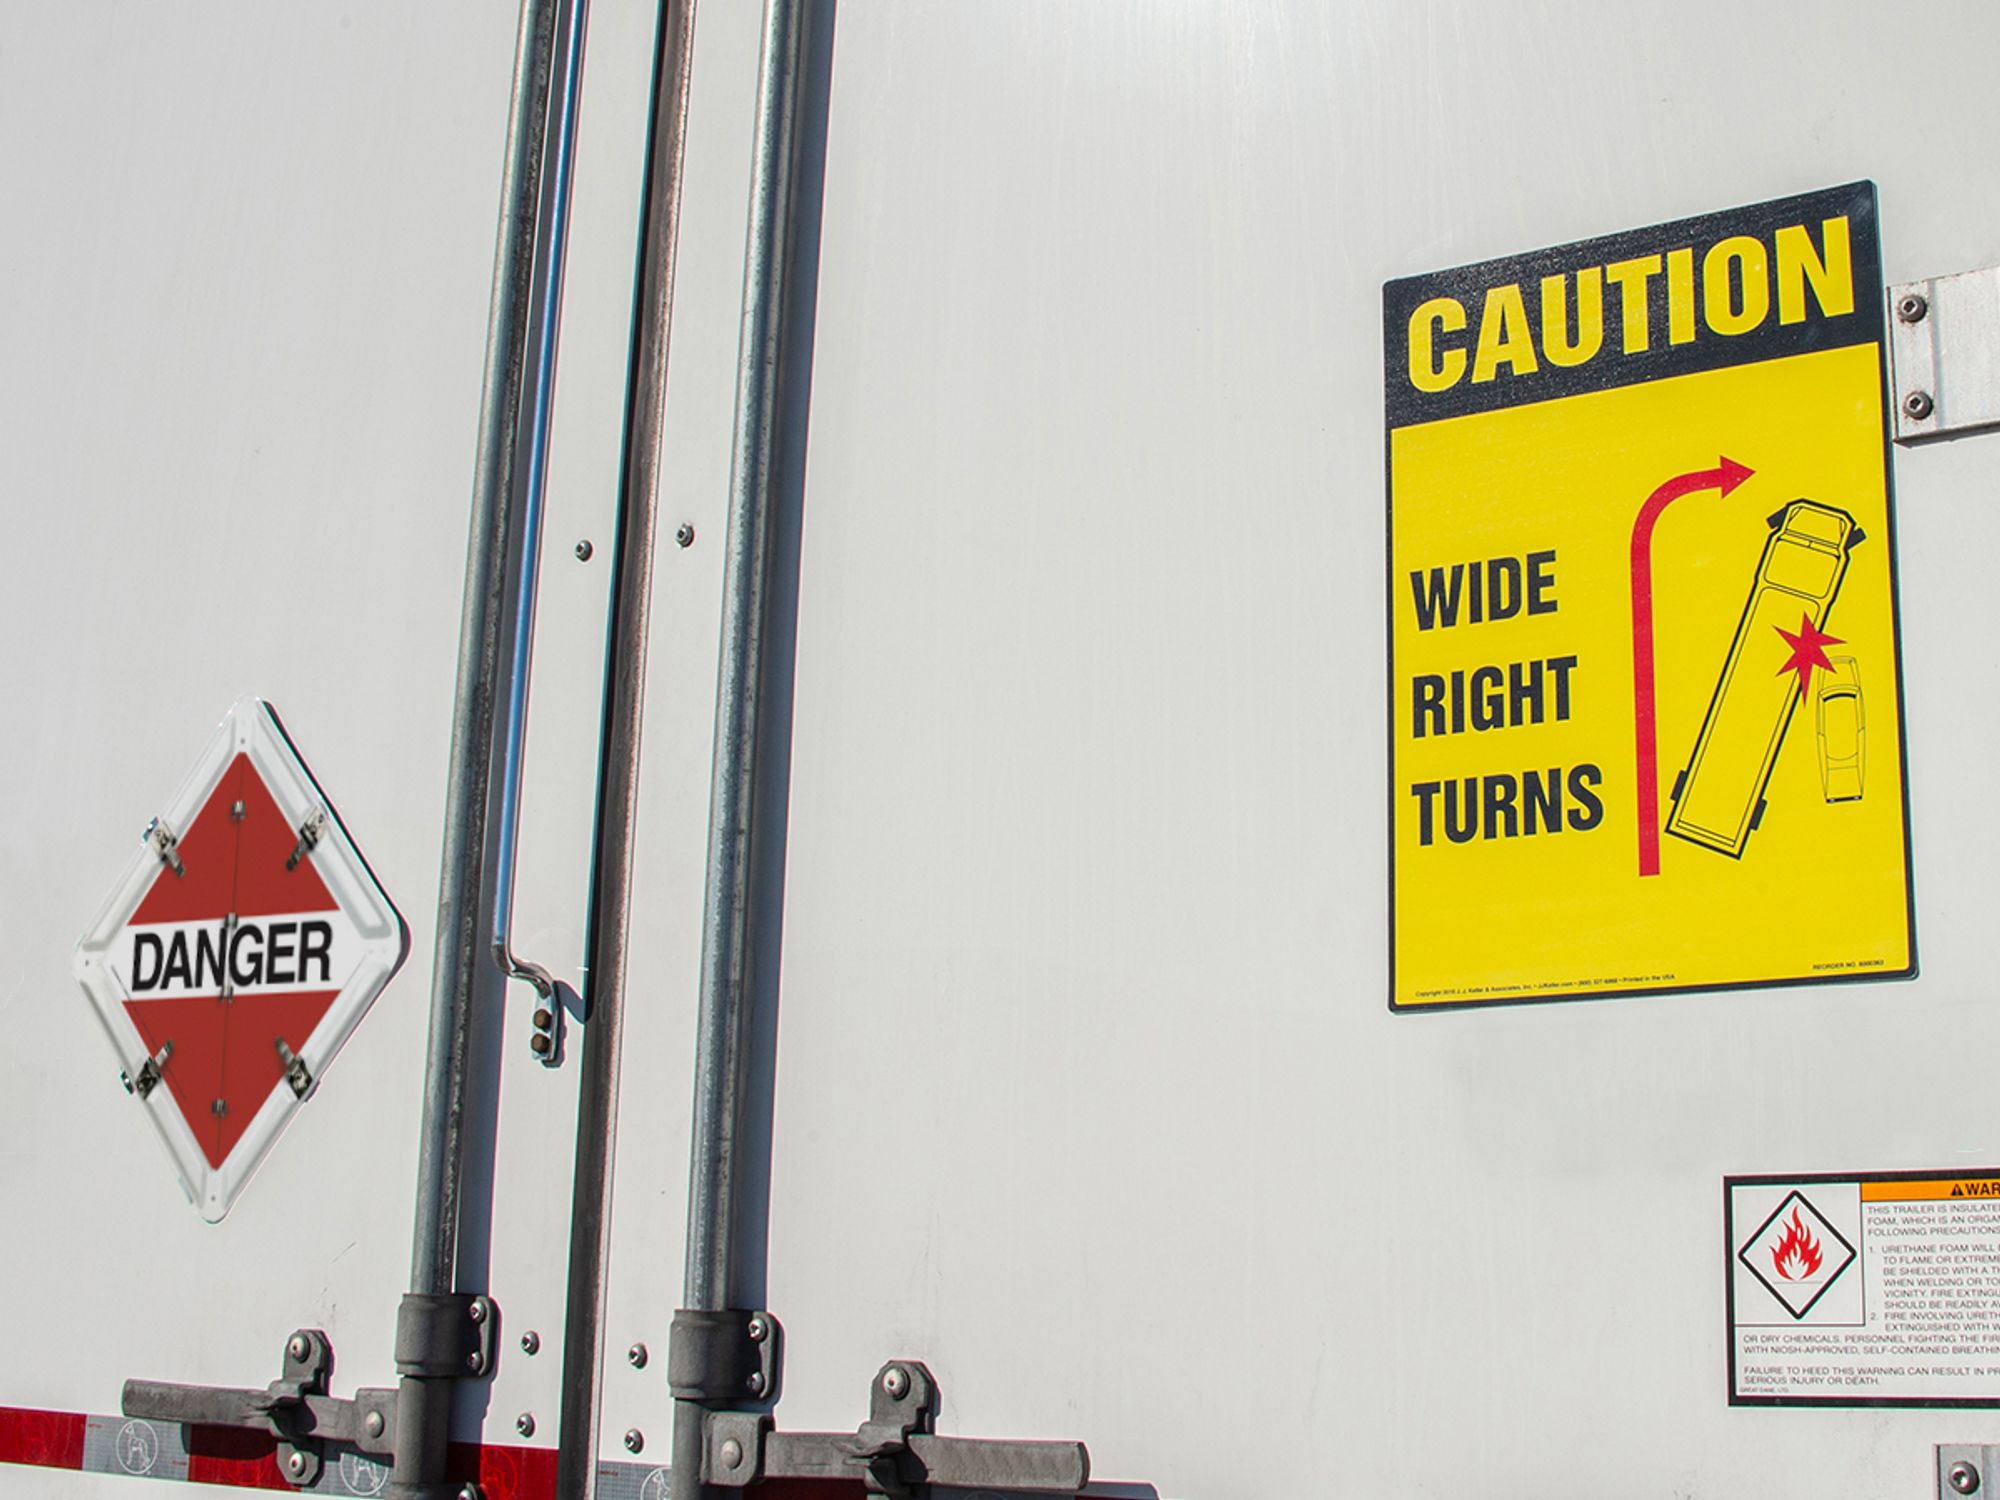 Who is responsible for dangerous goods safety marks?